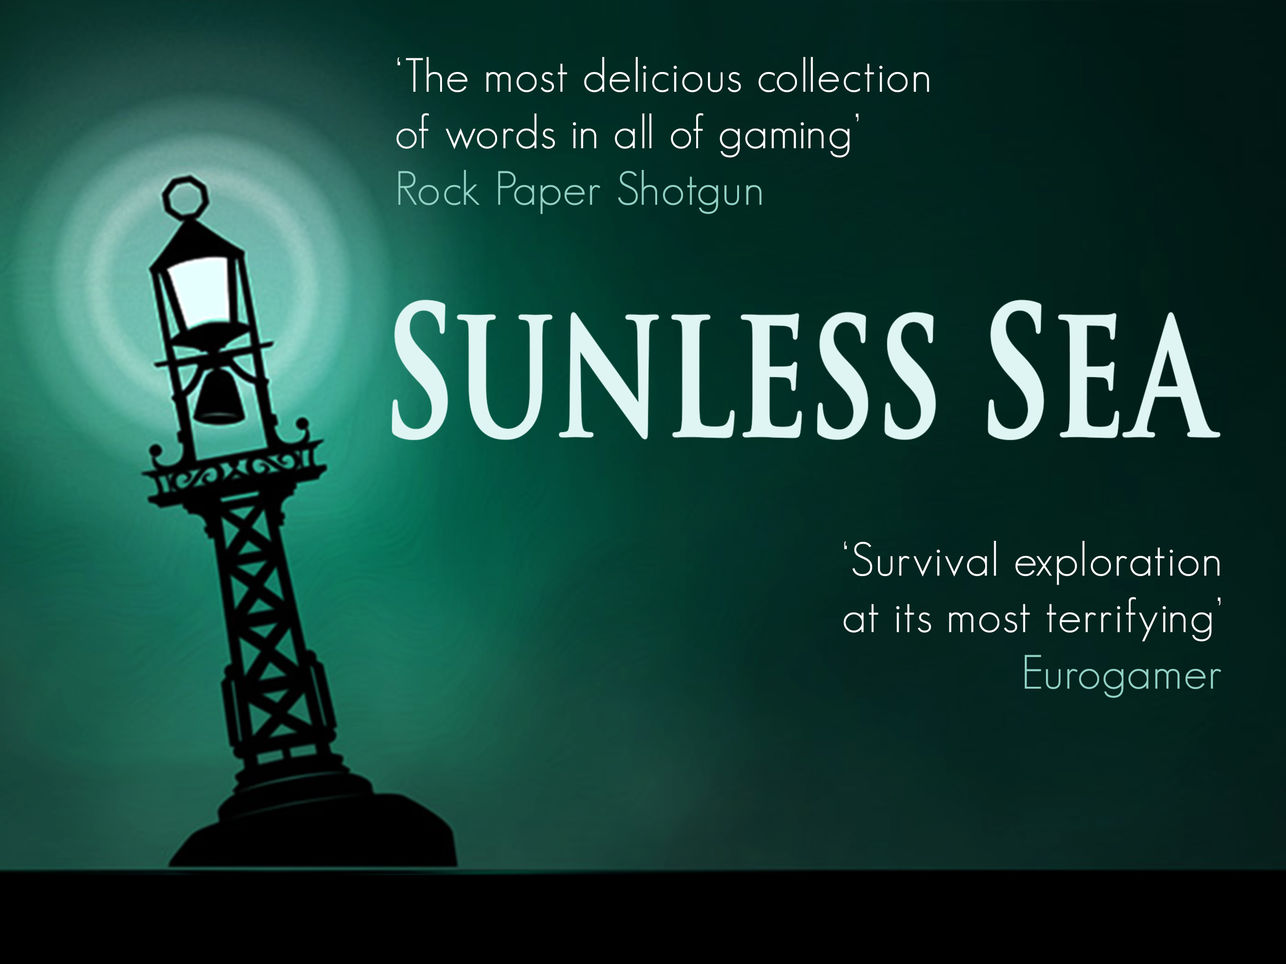 Deals of the day on the App Store: Sunless Sea, iWriter, Pro Paint and more!